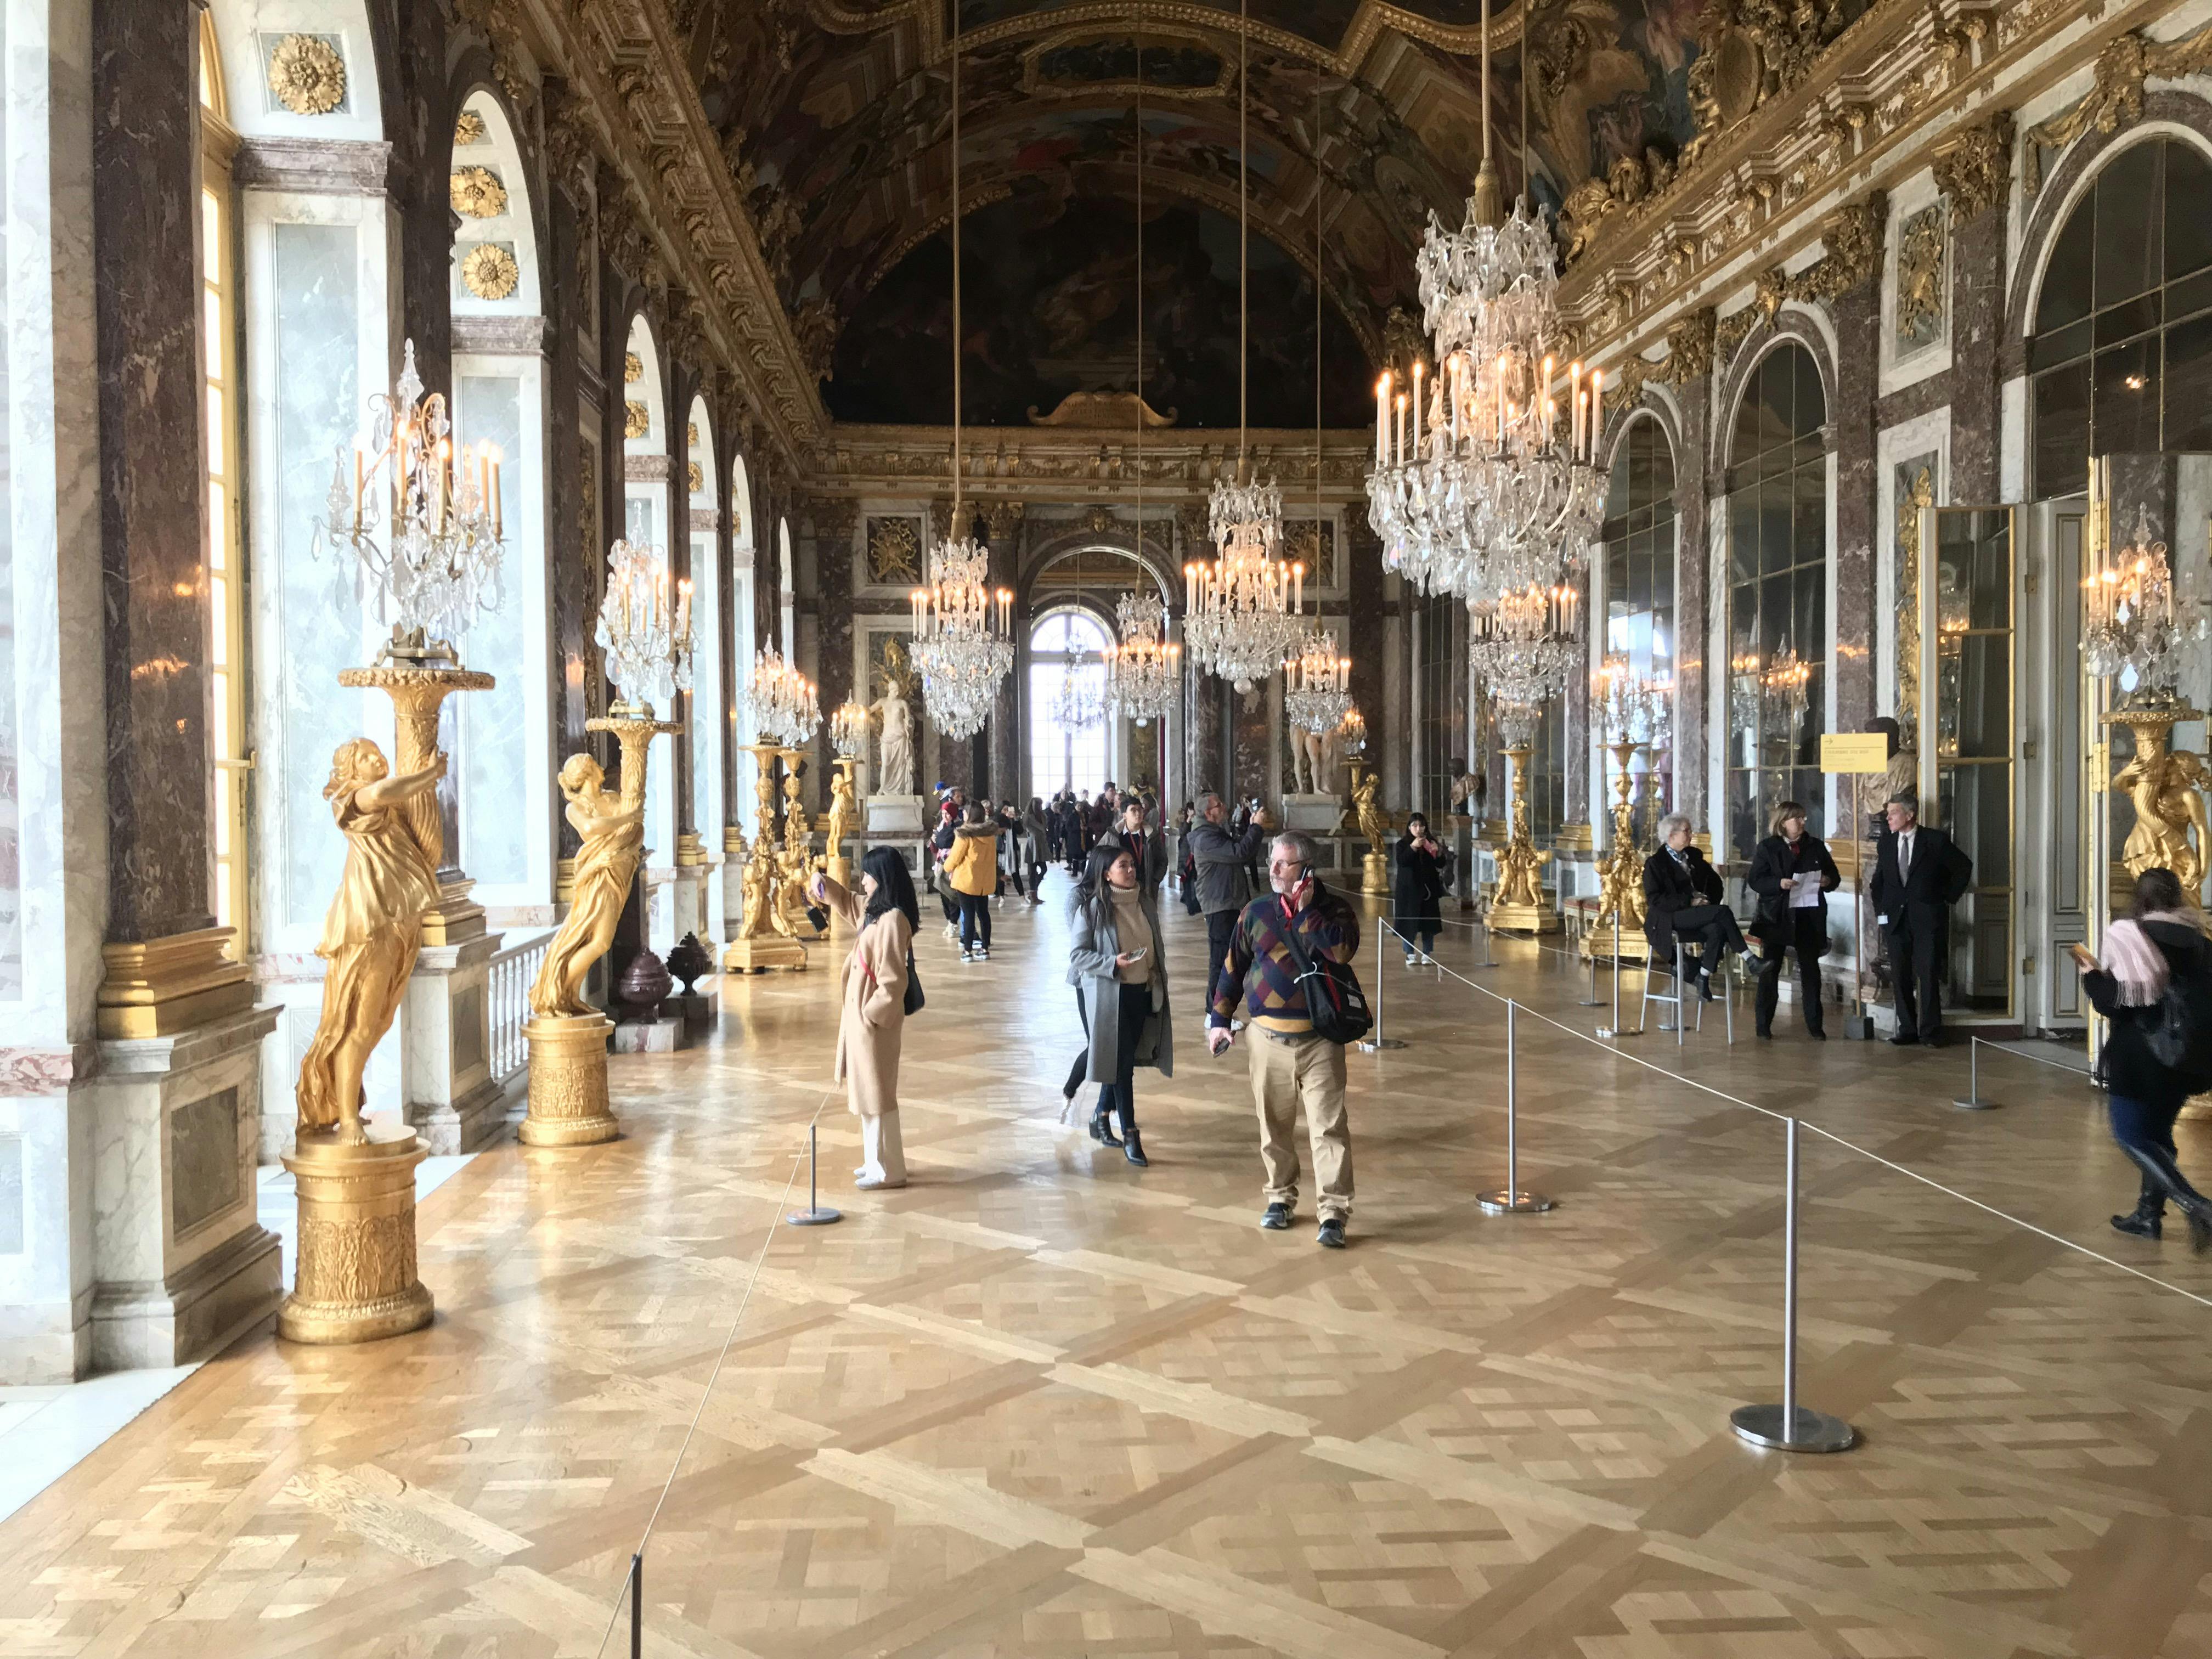 Half-day self-guided trip in Versailles with transportation and skip-the-line access